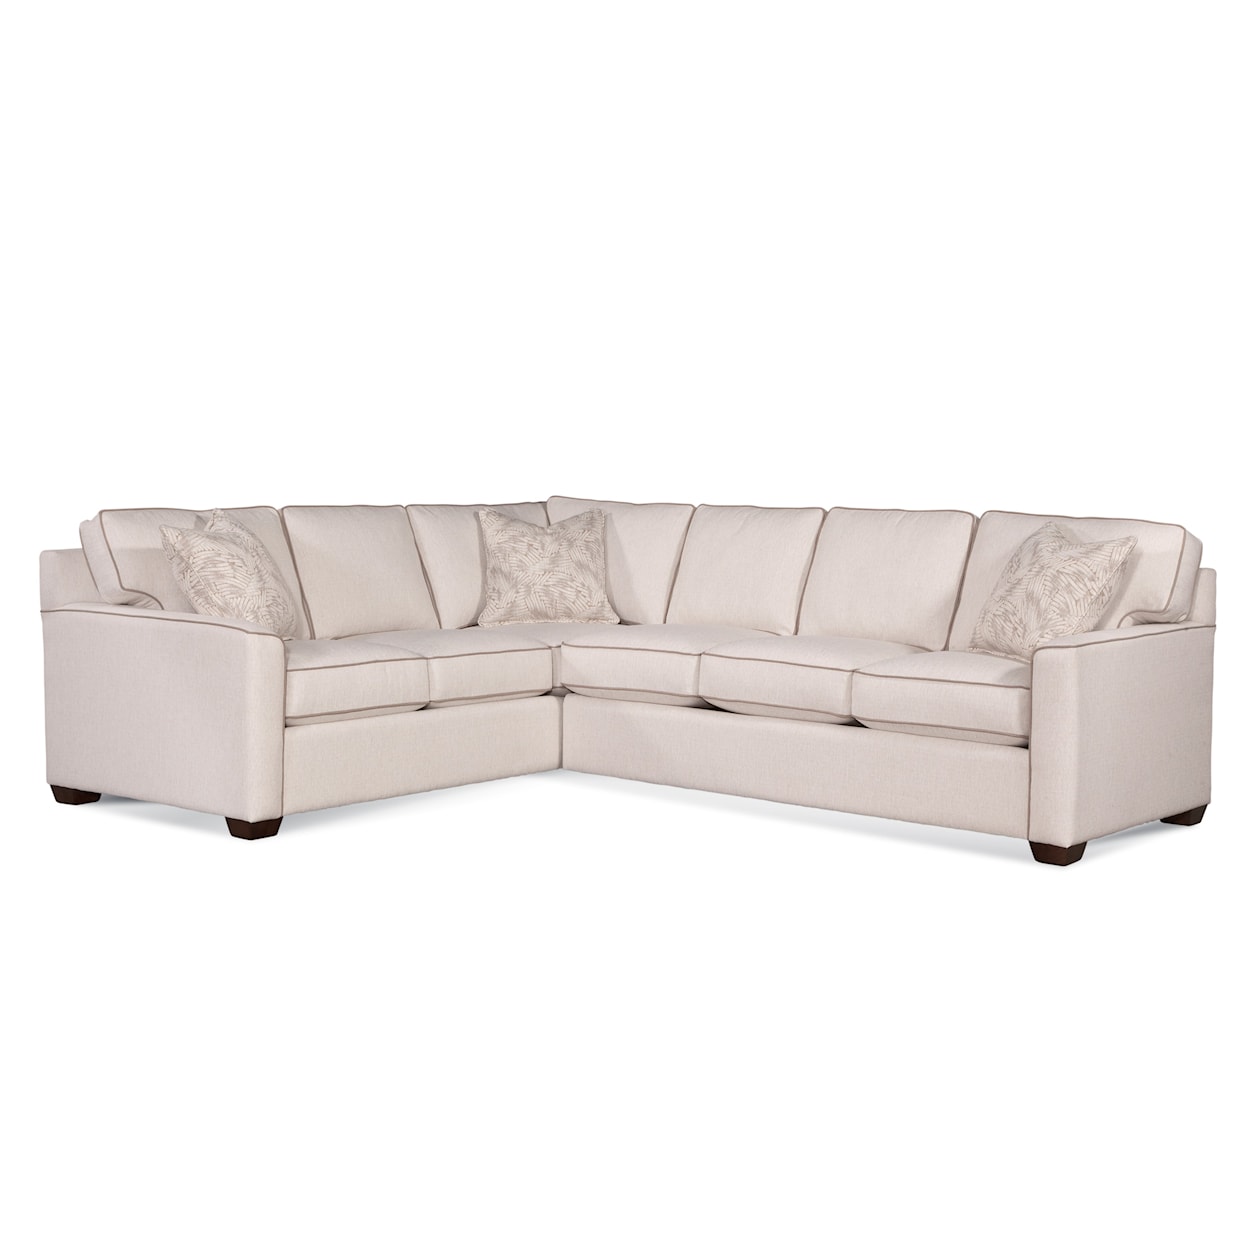 Braxton Culler Easton Two-Piece Sectional Sofa